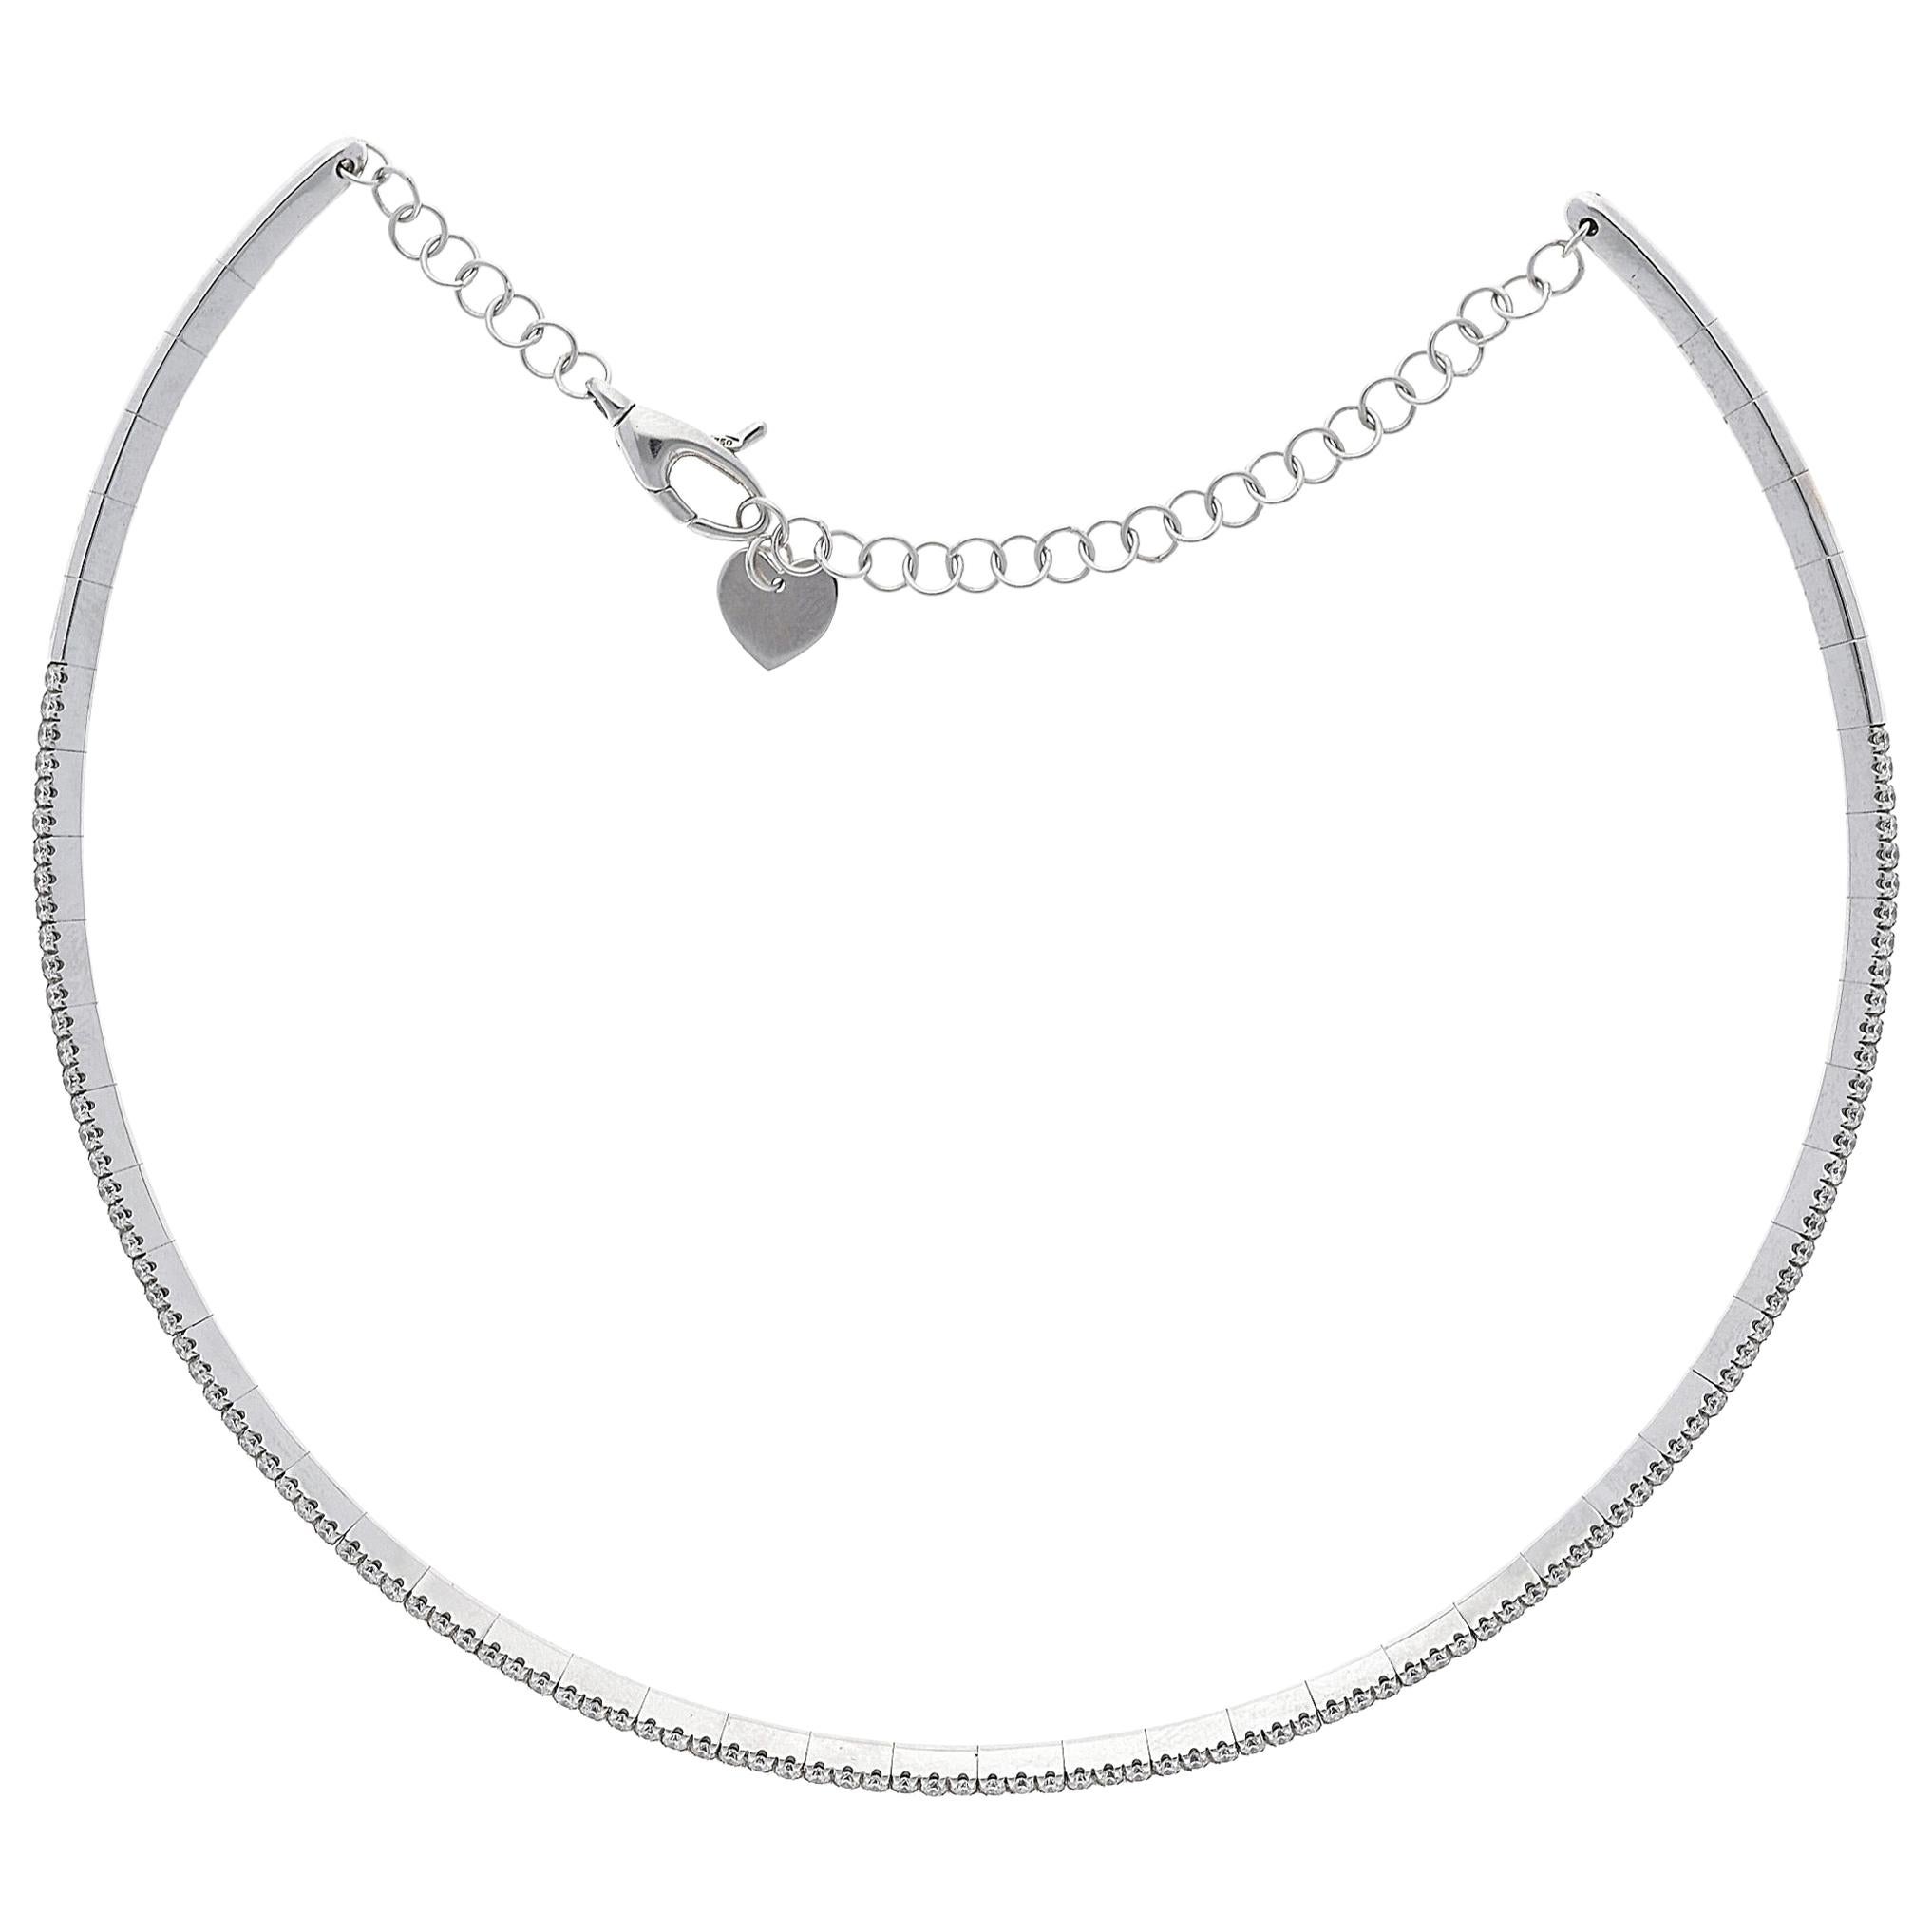 White gold 18 Karat flexible chocker necklace with diamonds.
The necklace has a chain for different neck size.
Total Diamonds Weight: ct. 1.48
Total Weight of 18 Kt Gold: 15.5 grams
Number of Diamonds: n°  111
Diamond characteristics: 
Color: G